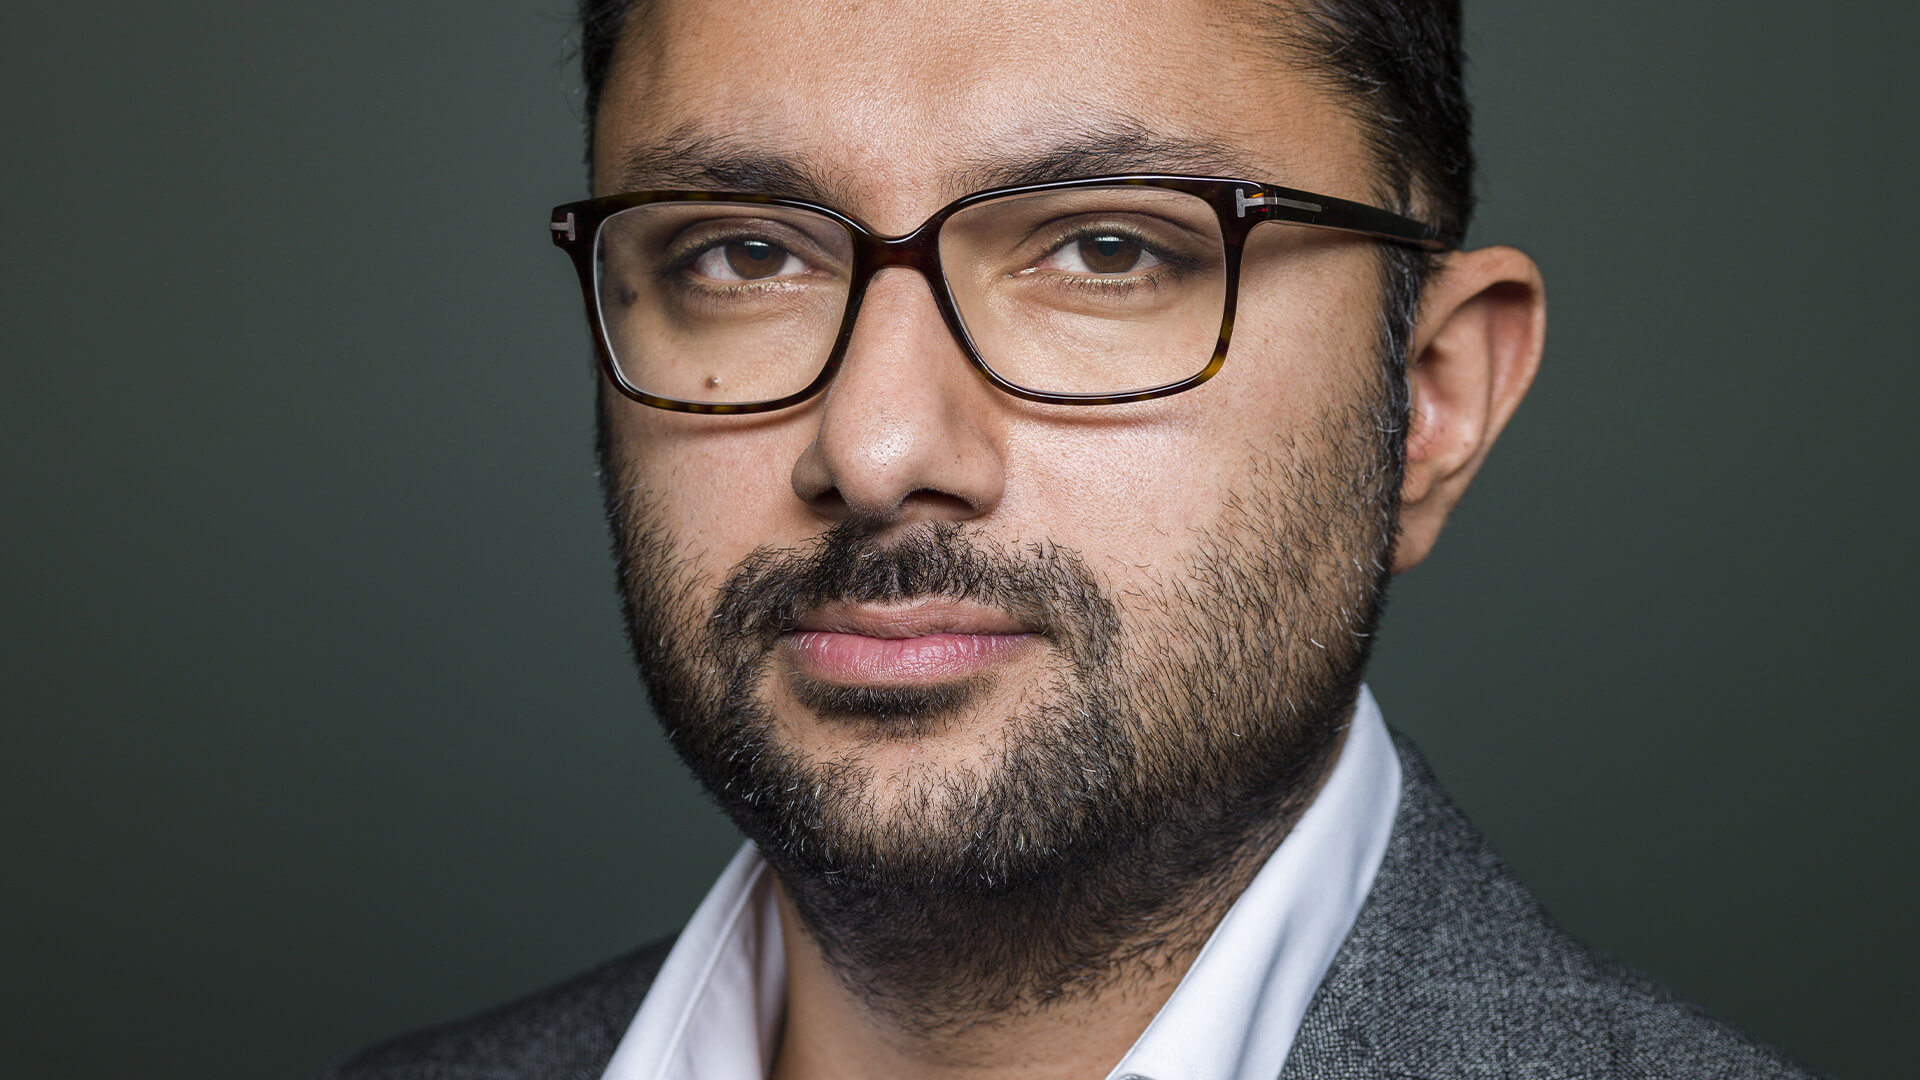 Sathnam Sanghera will be appearing at this year's Chalke History Festival